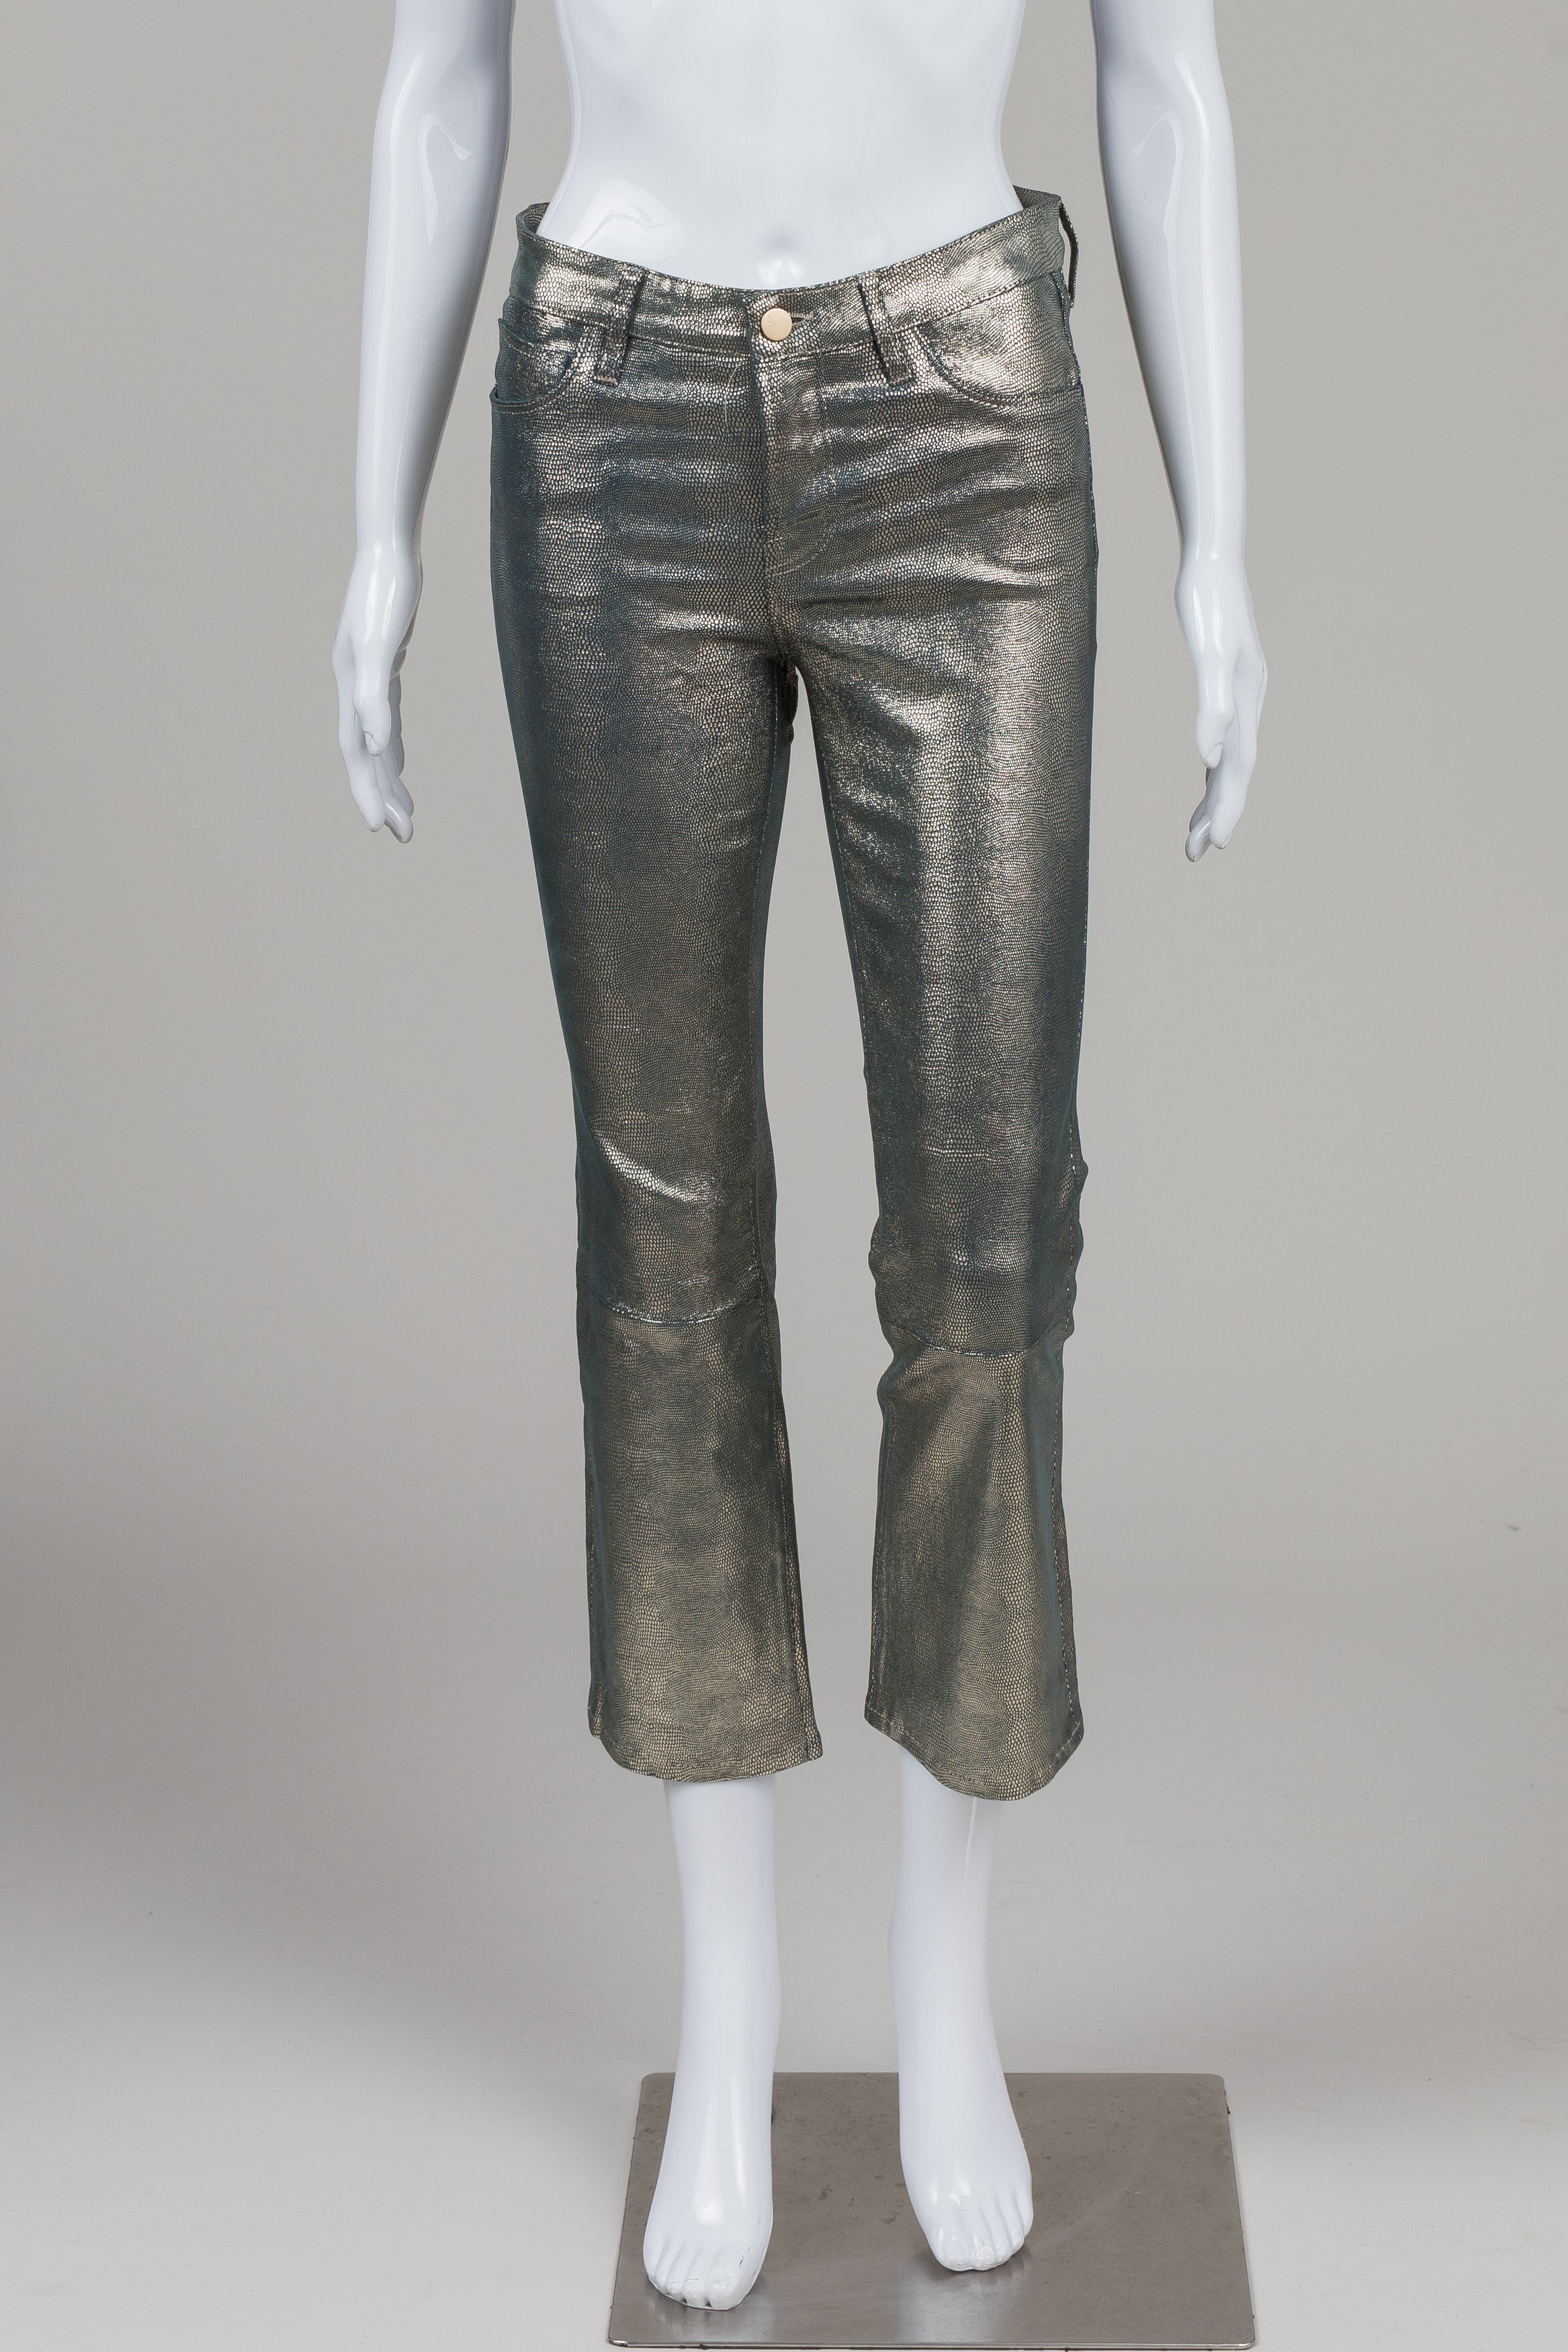 J Brand Pewter Metallic Look Stretch Leather Pants (25)